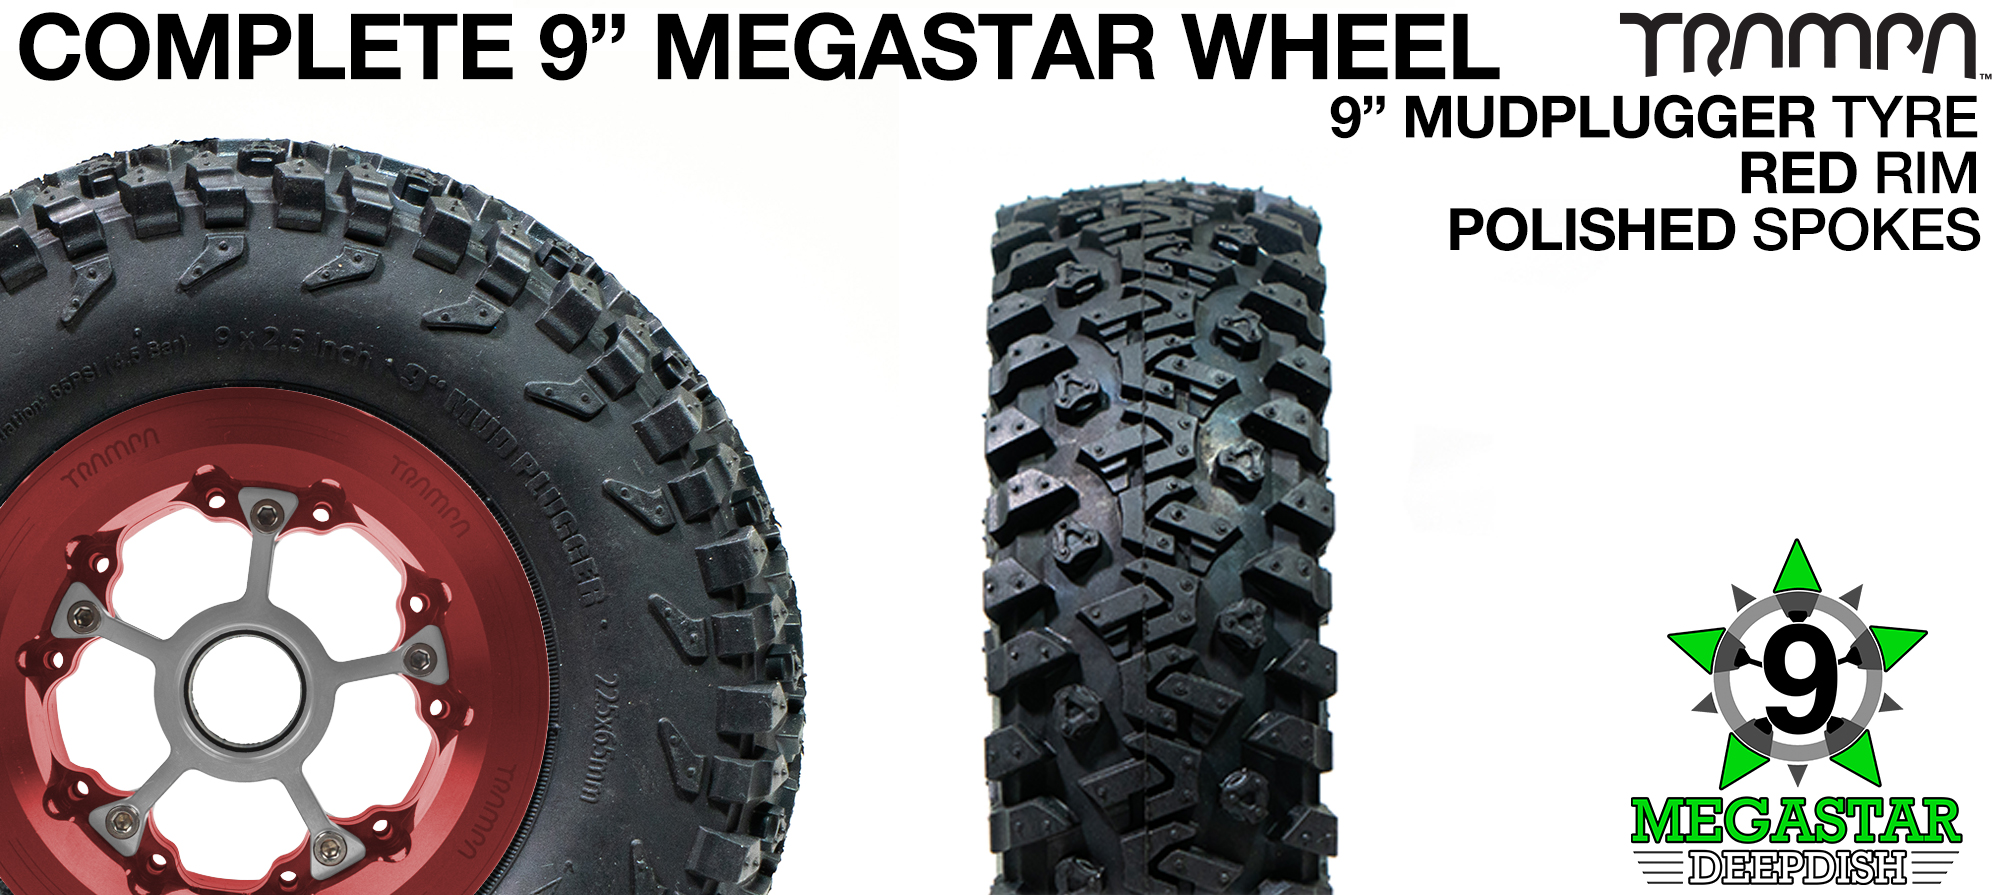 RED 9 inch Deep-Dish MEGASTARS Rim with POLISHED Spokes & 9 Inch MUDPLUGGER Tyre